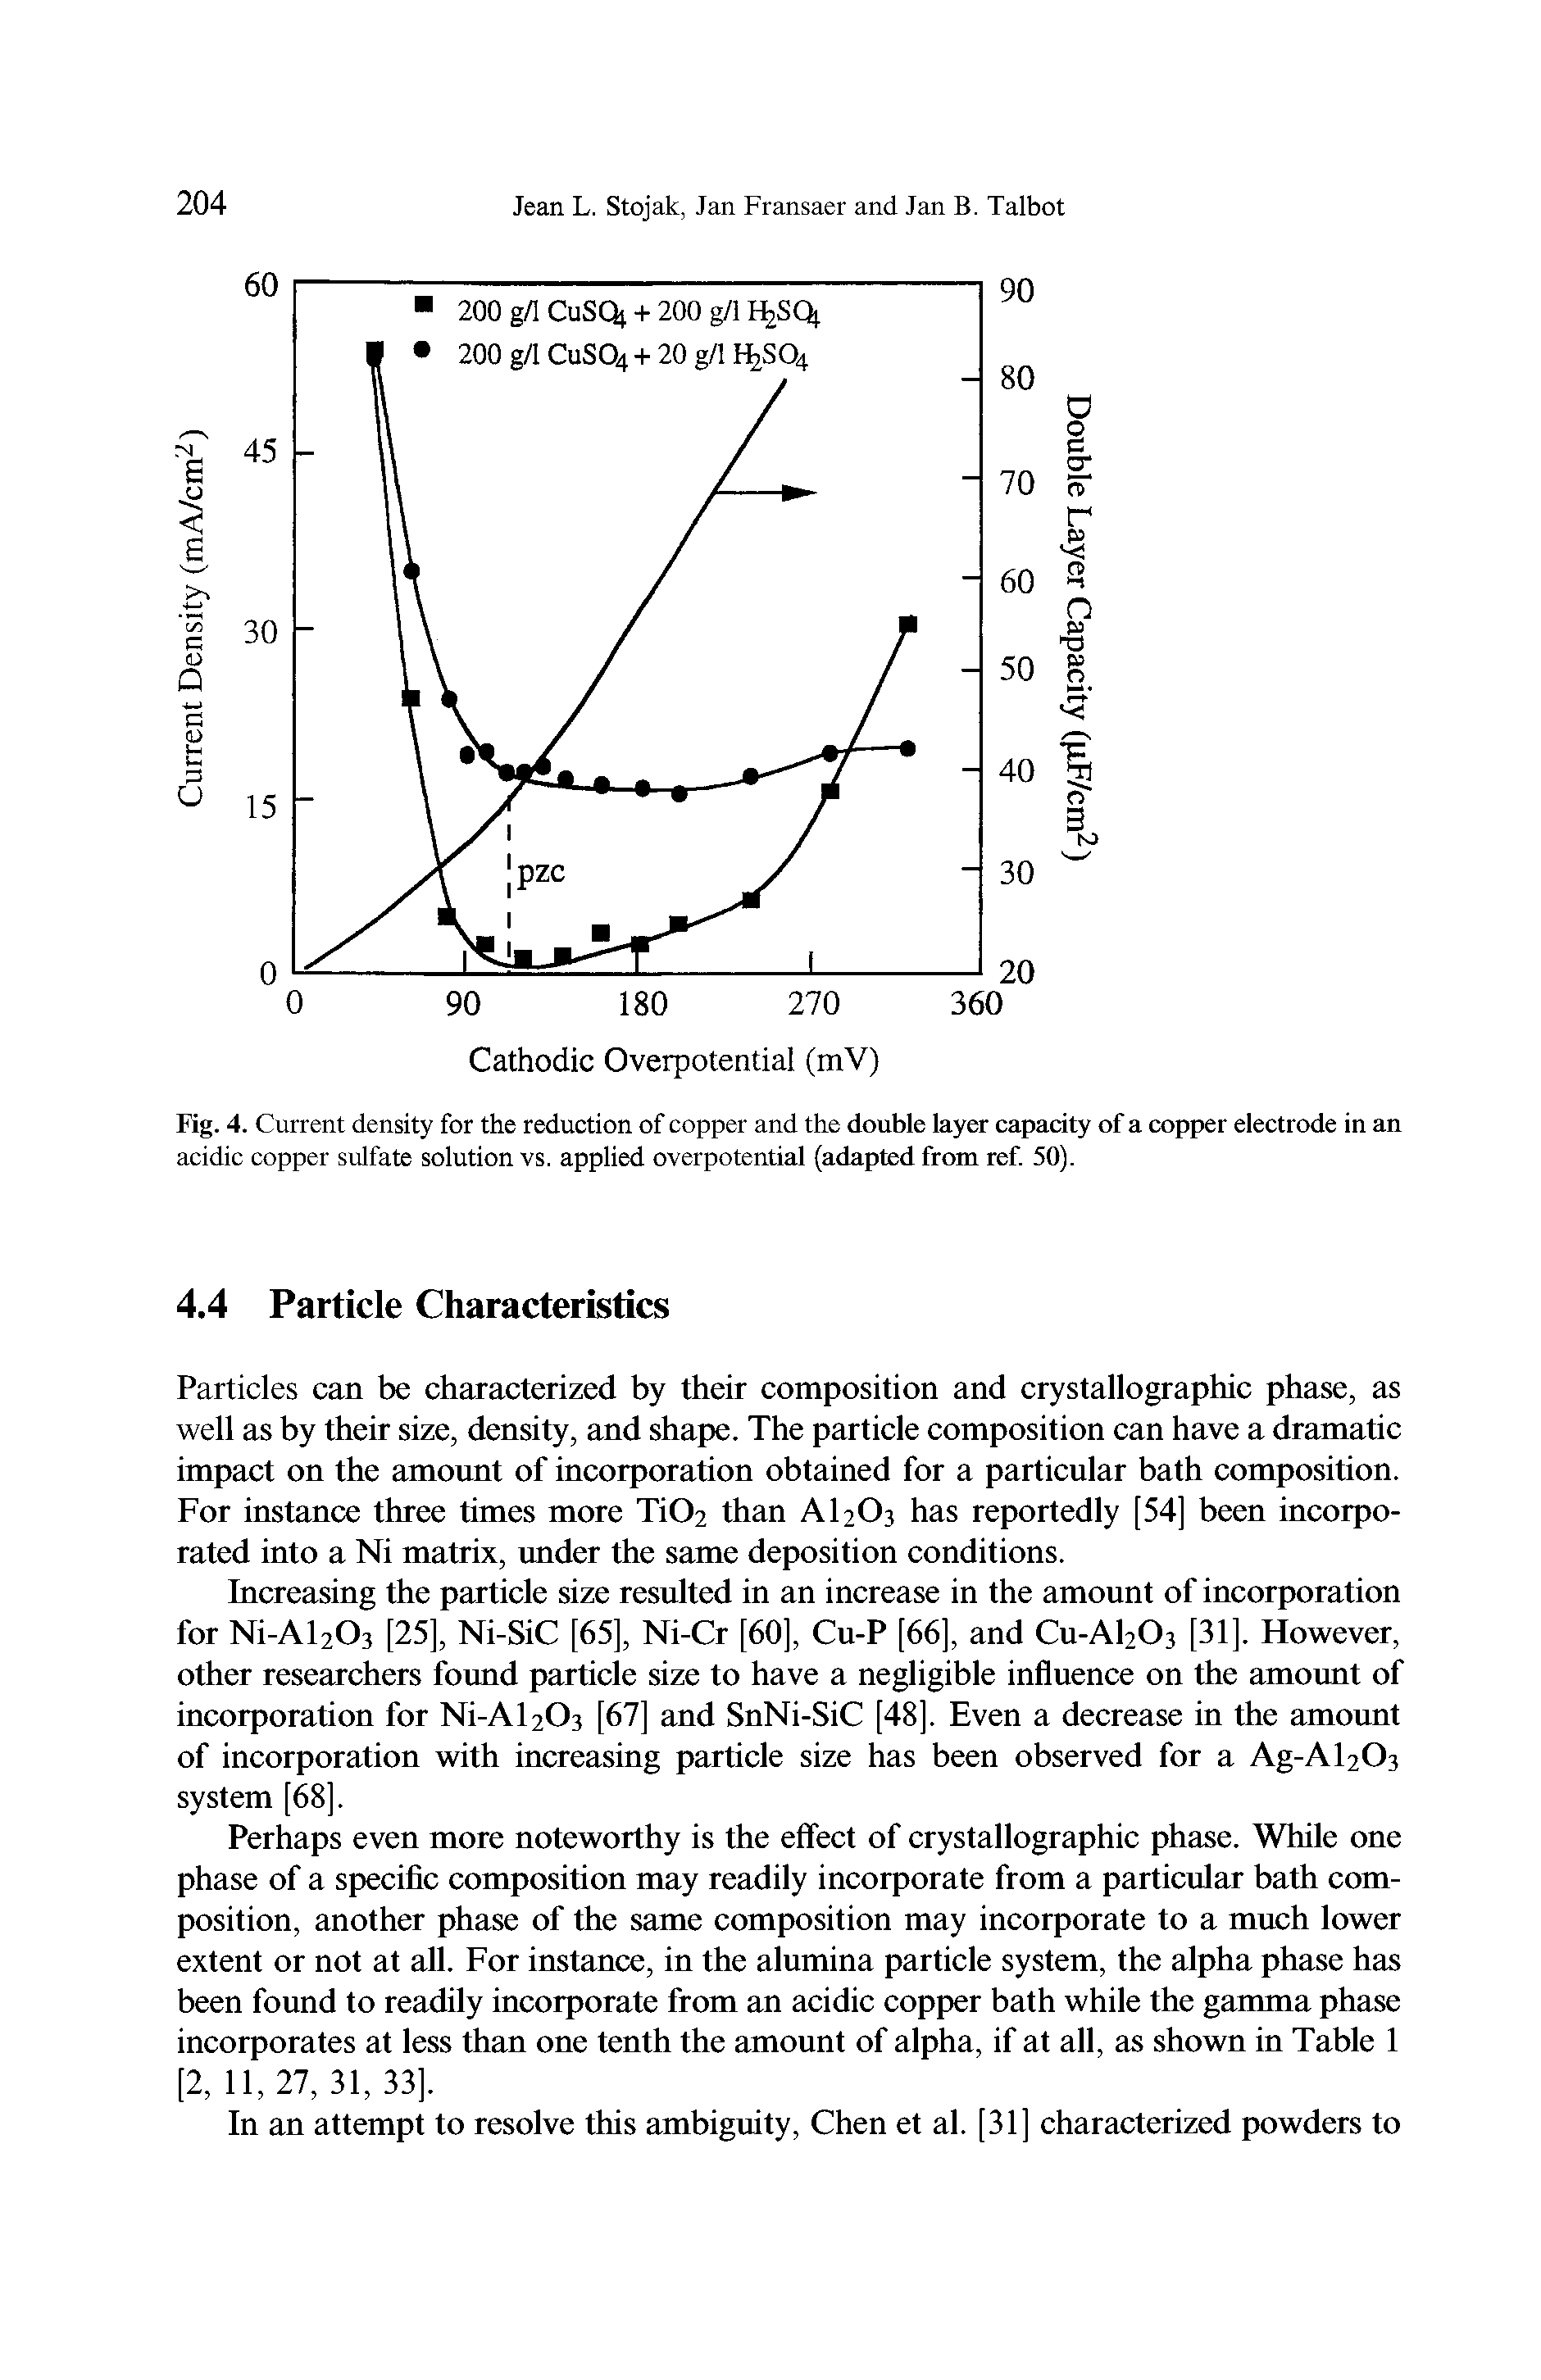 Fig. 4. Current density for the reduction of copper and the double layer capacity of a copper electrode in an acidic copper sulfate solution vs. applied overpotential (adapted from ref. 50).